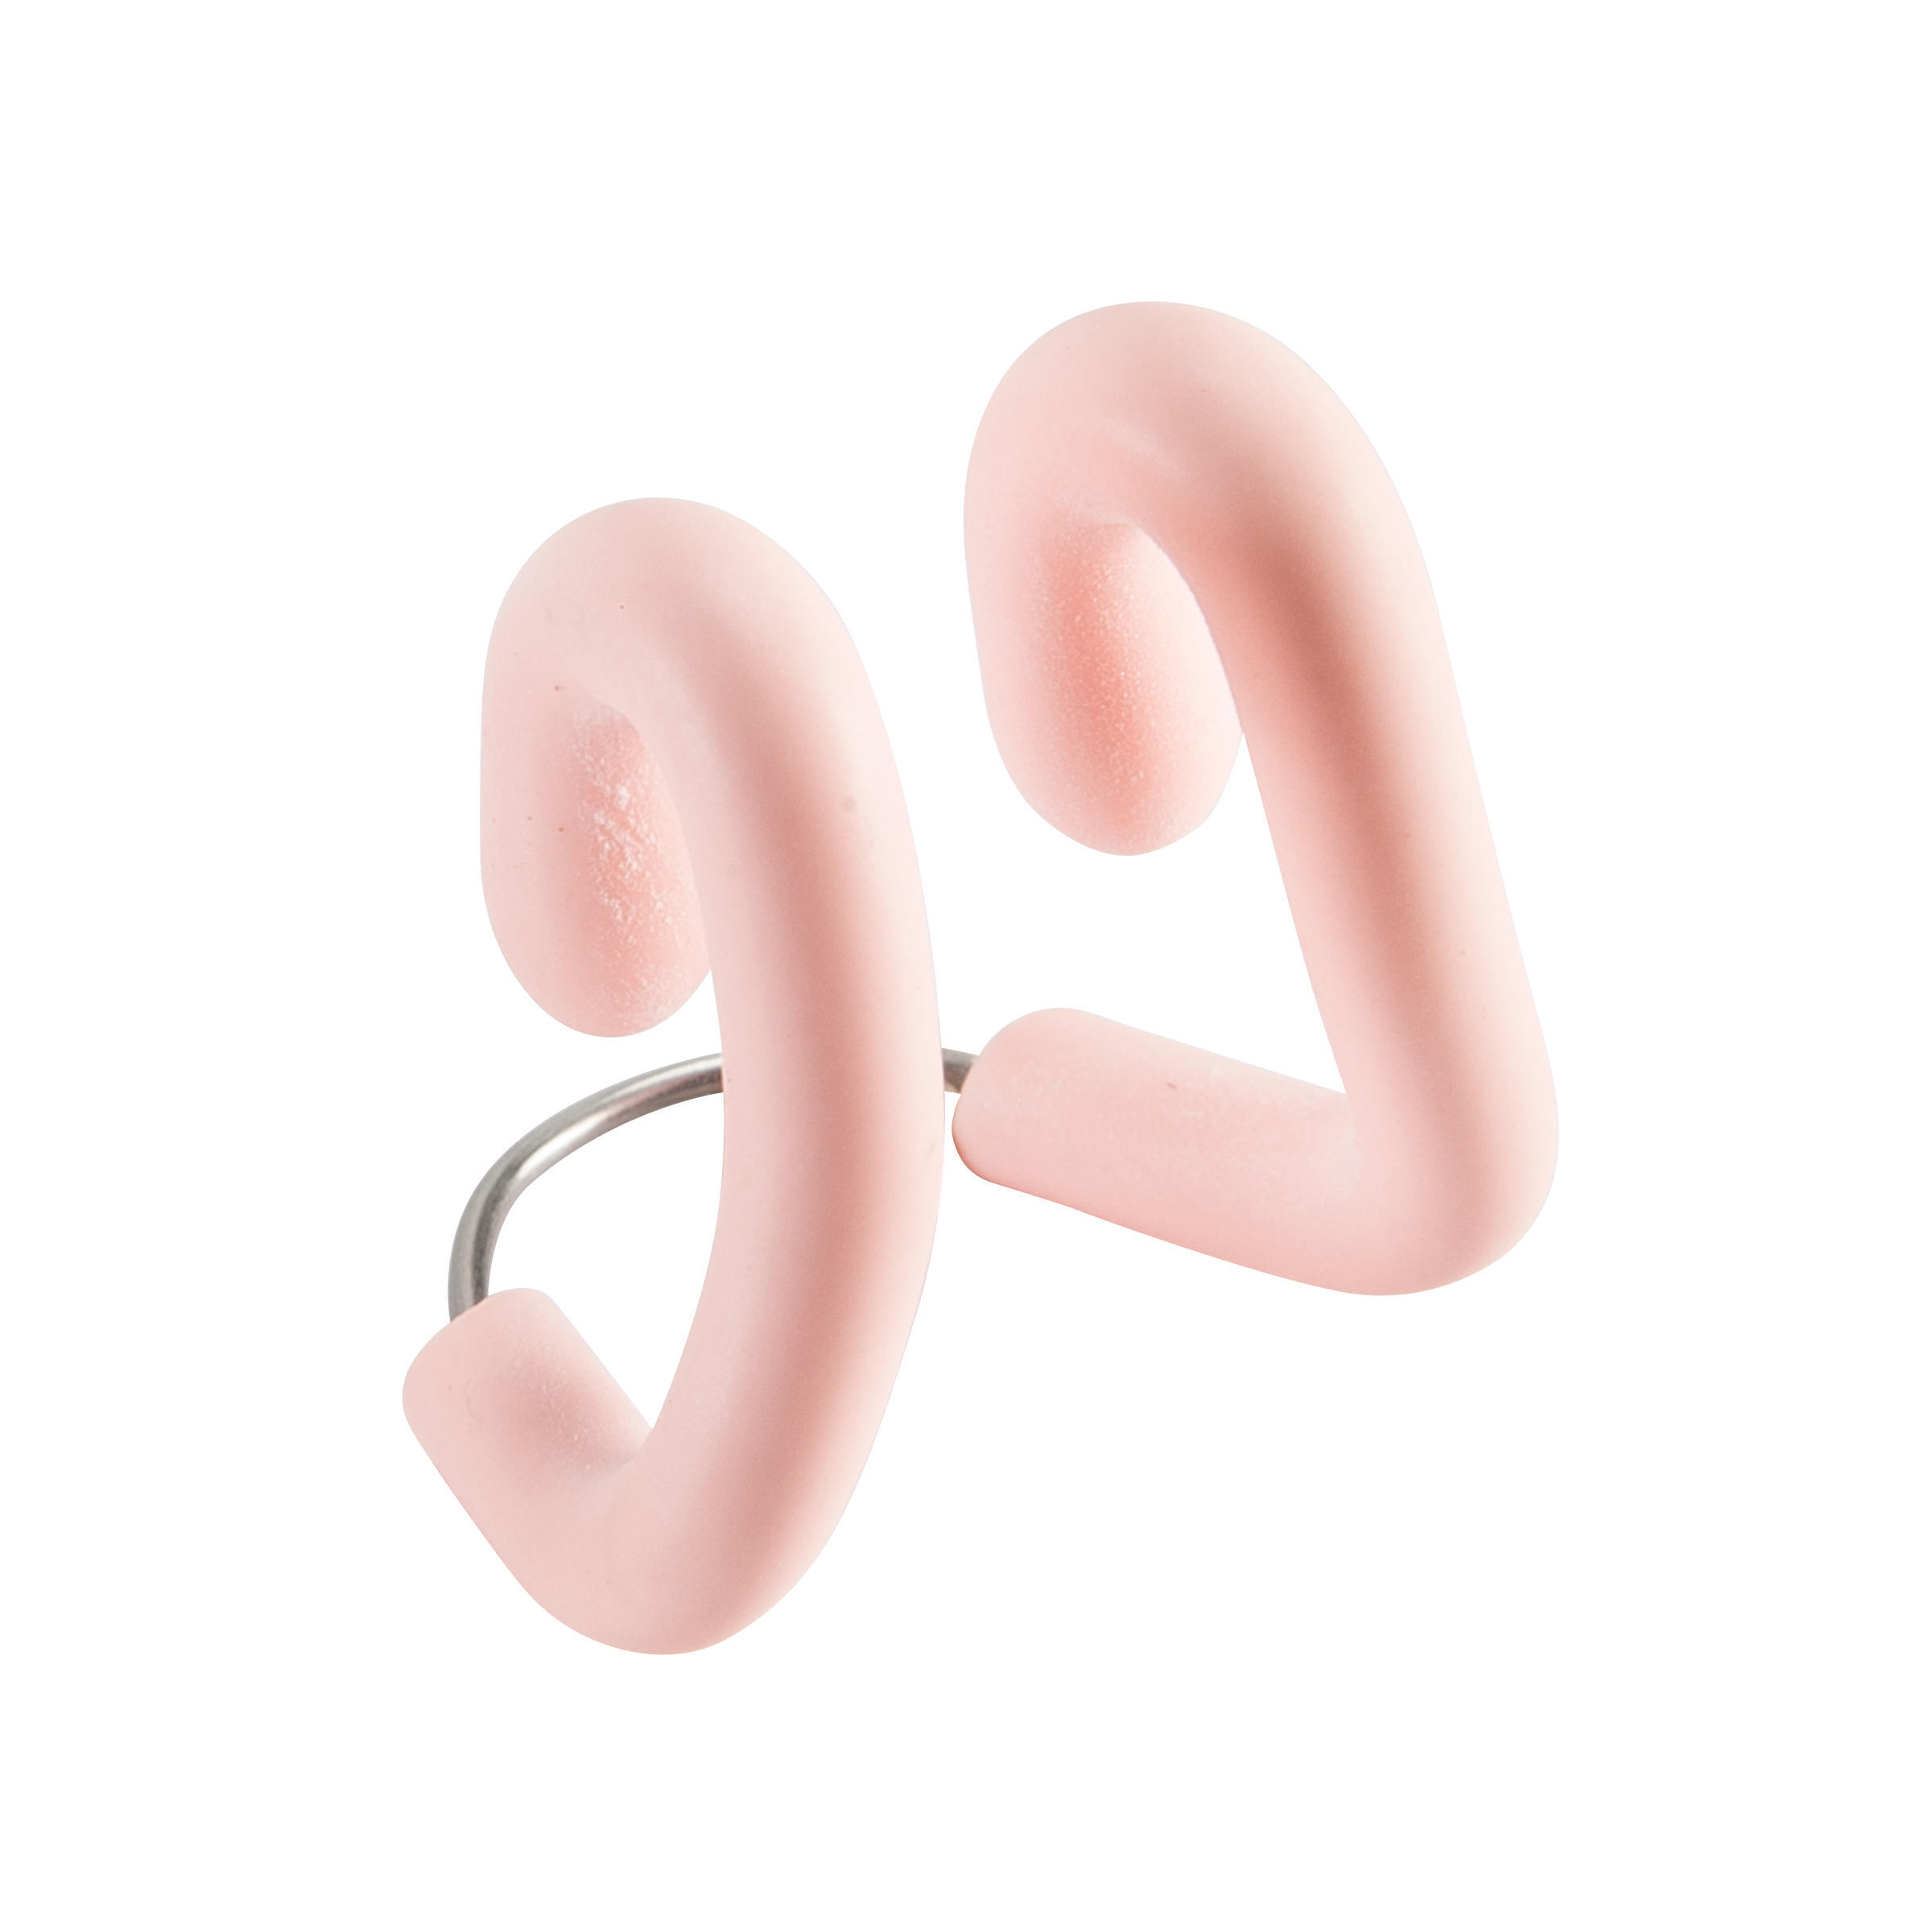 SWIMMING ADJUSTABLE STAINLESS STEEL-LATEX NOSE CLIP - PASTEL PINK 2/4